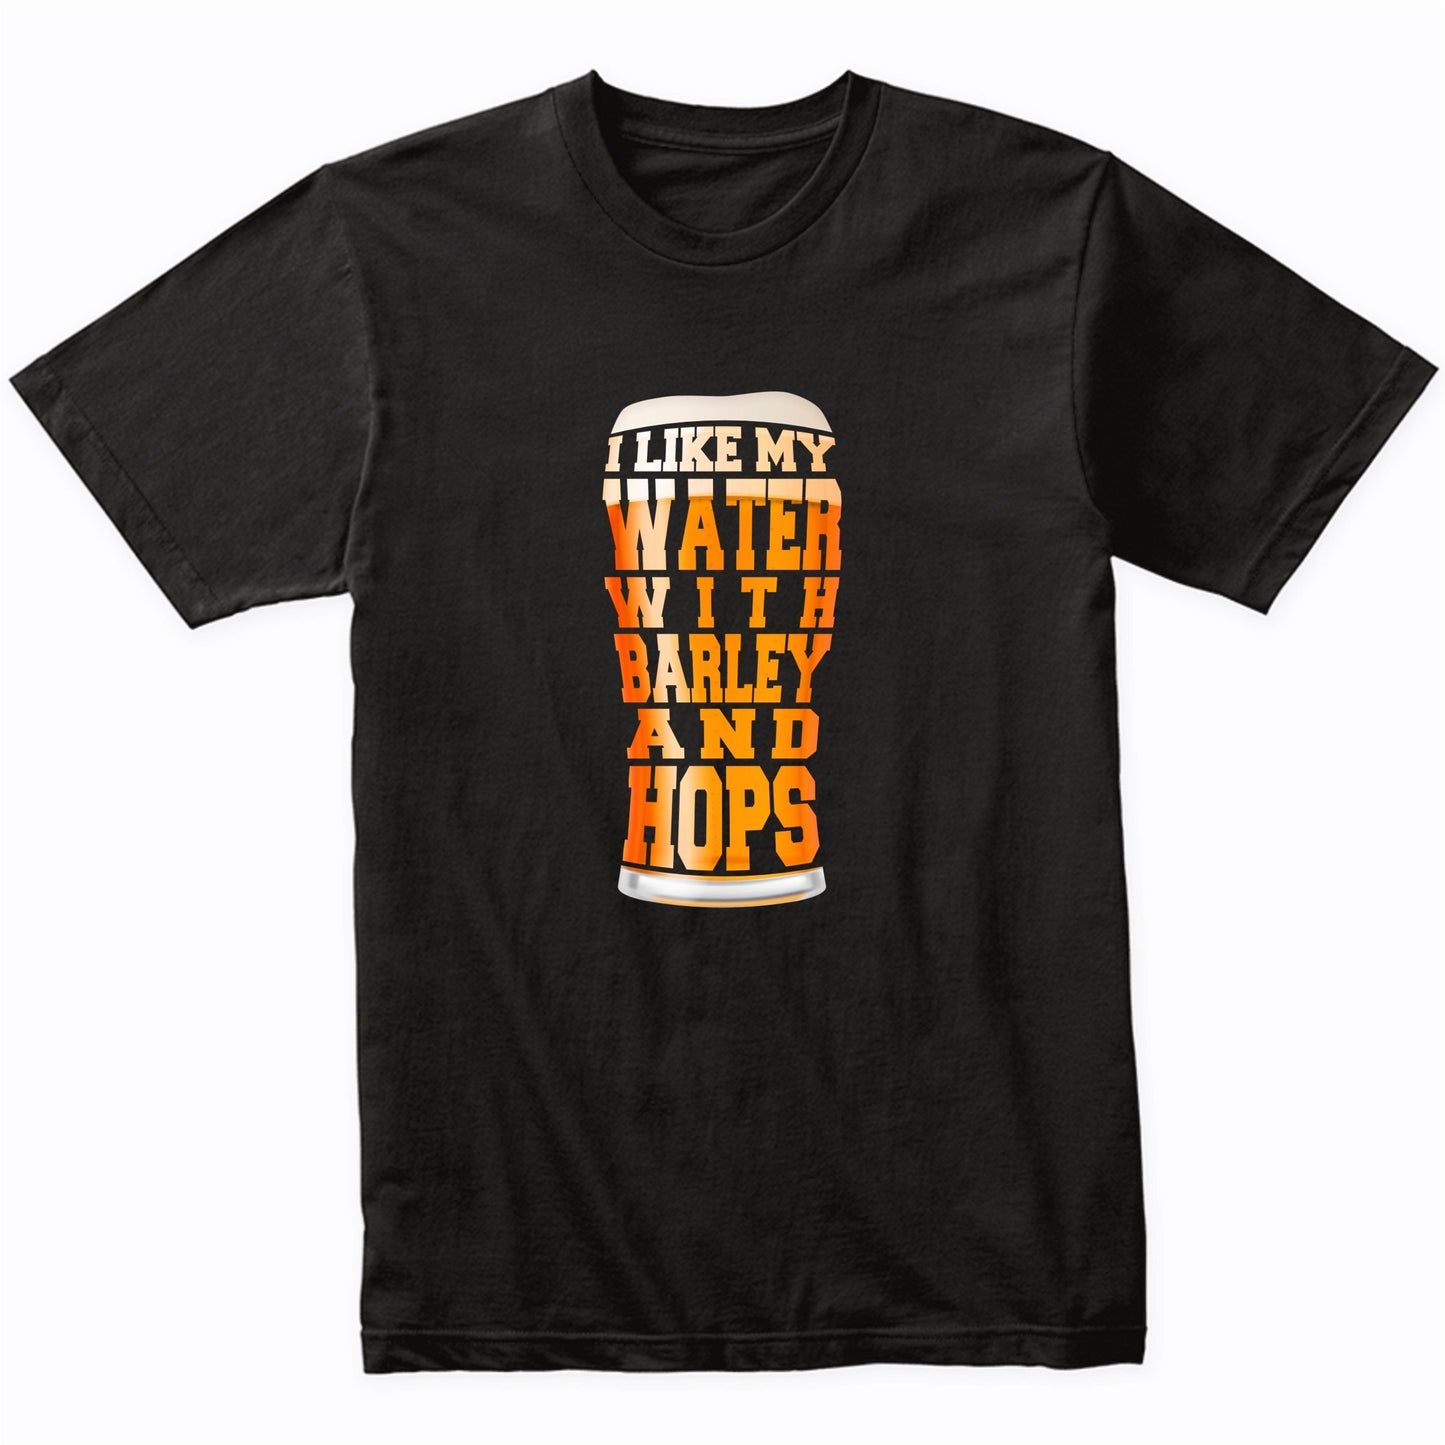 I Like My Water With Barley And Hops Funny Craft Beer T-Shirt